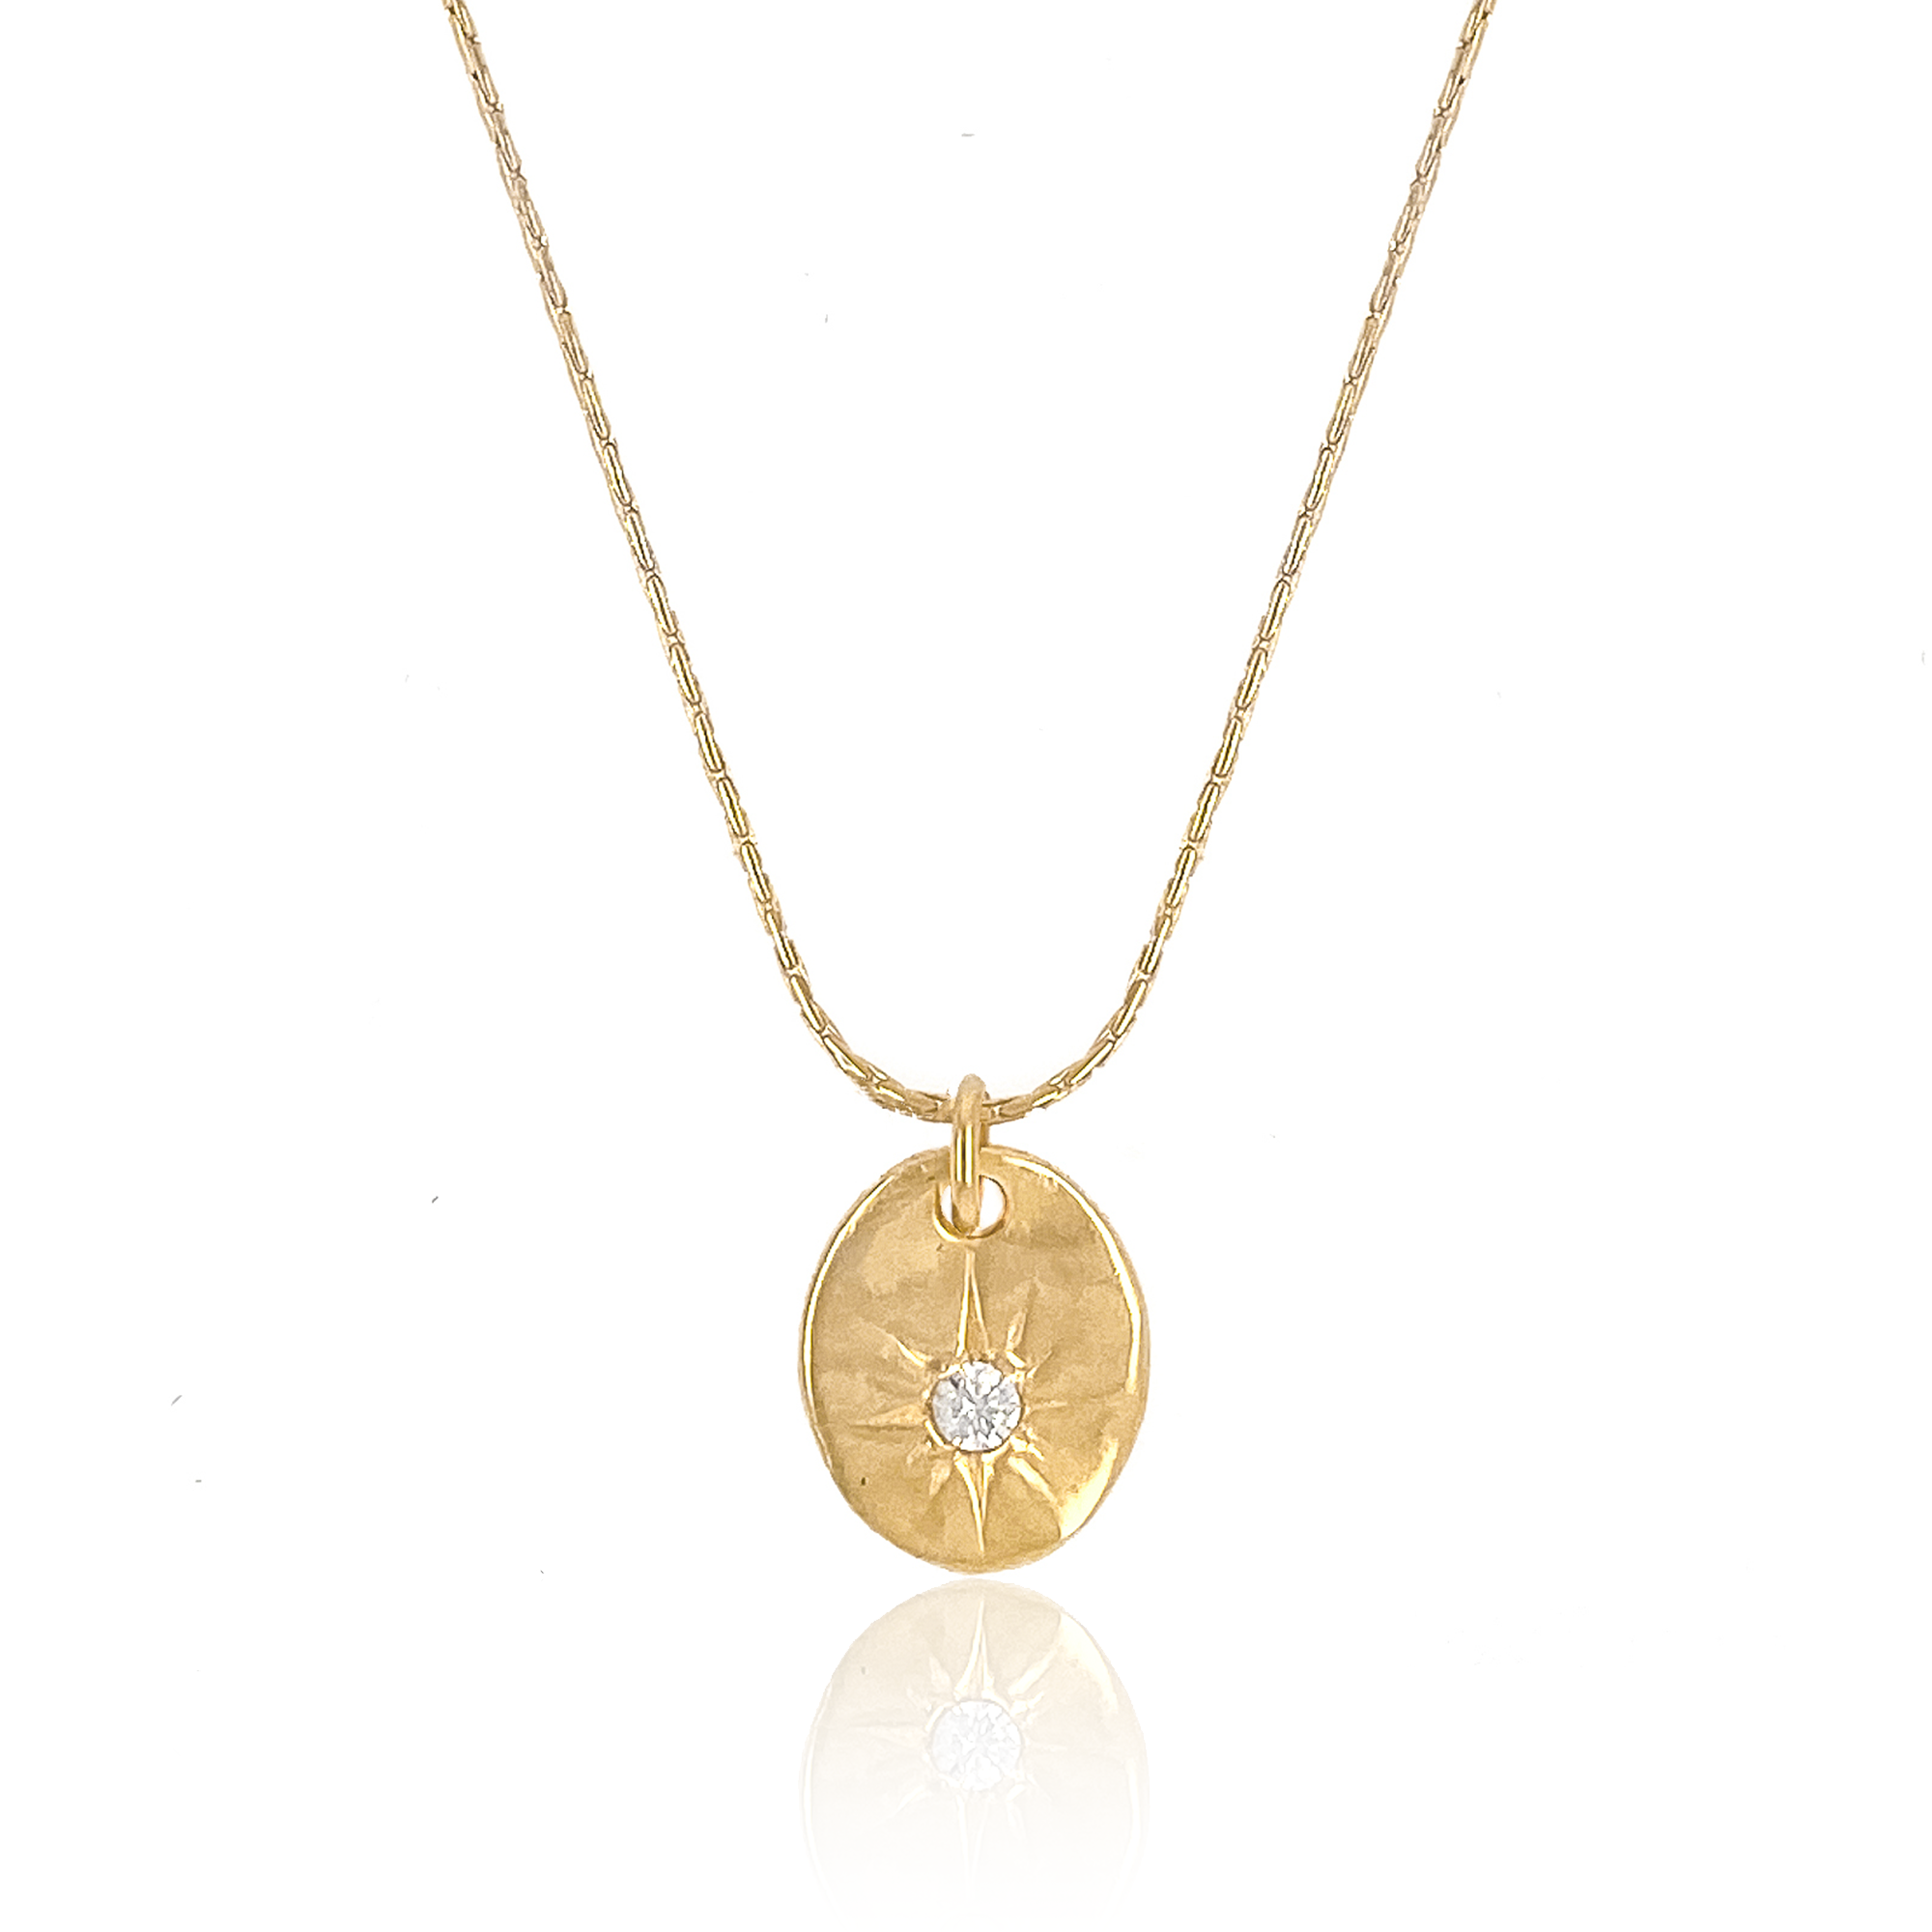 The Ophelia Pendant Necklace by Mod + Jo